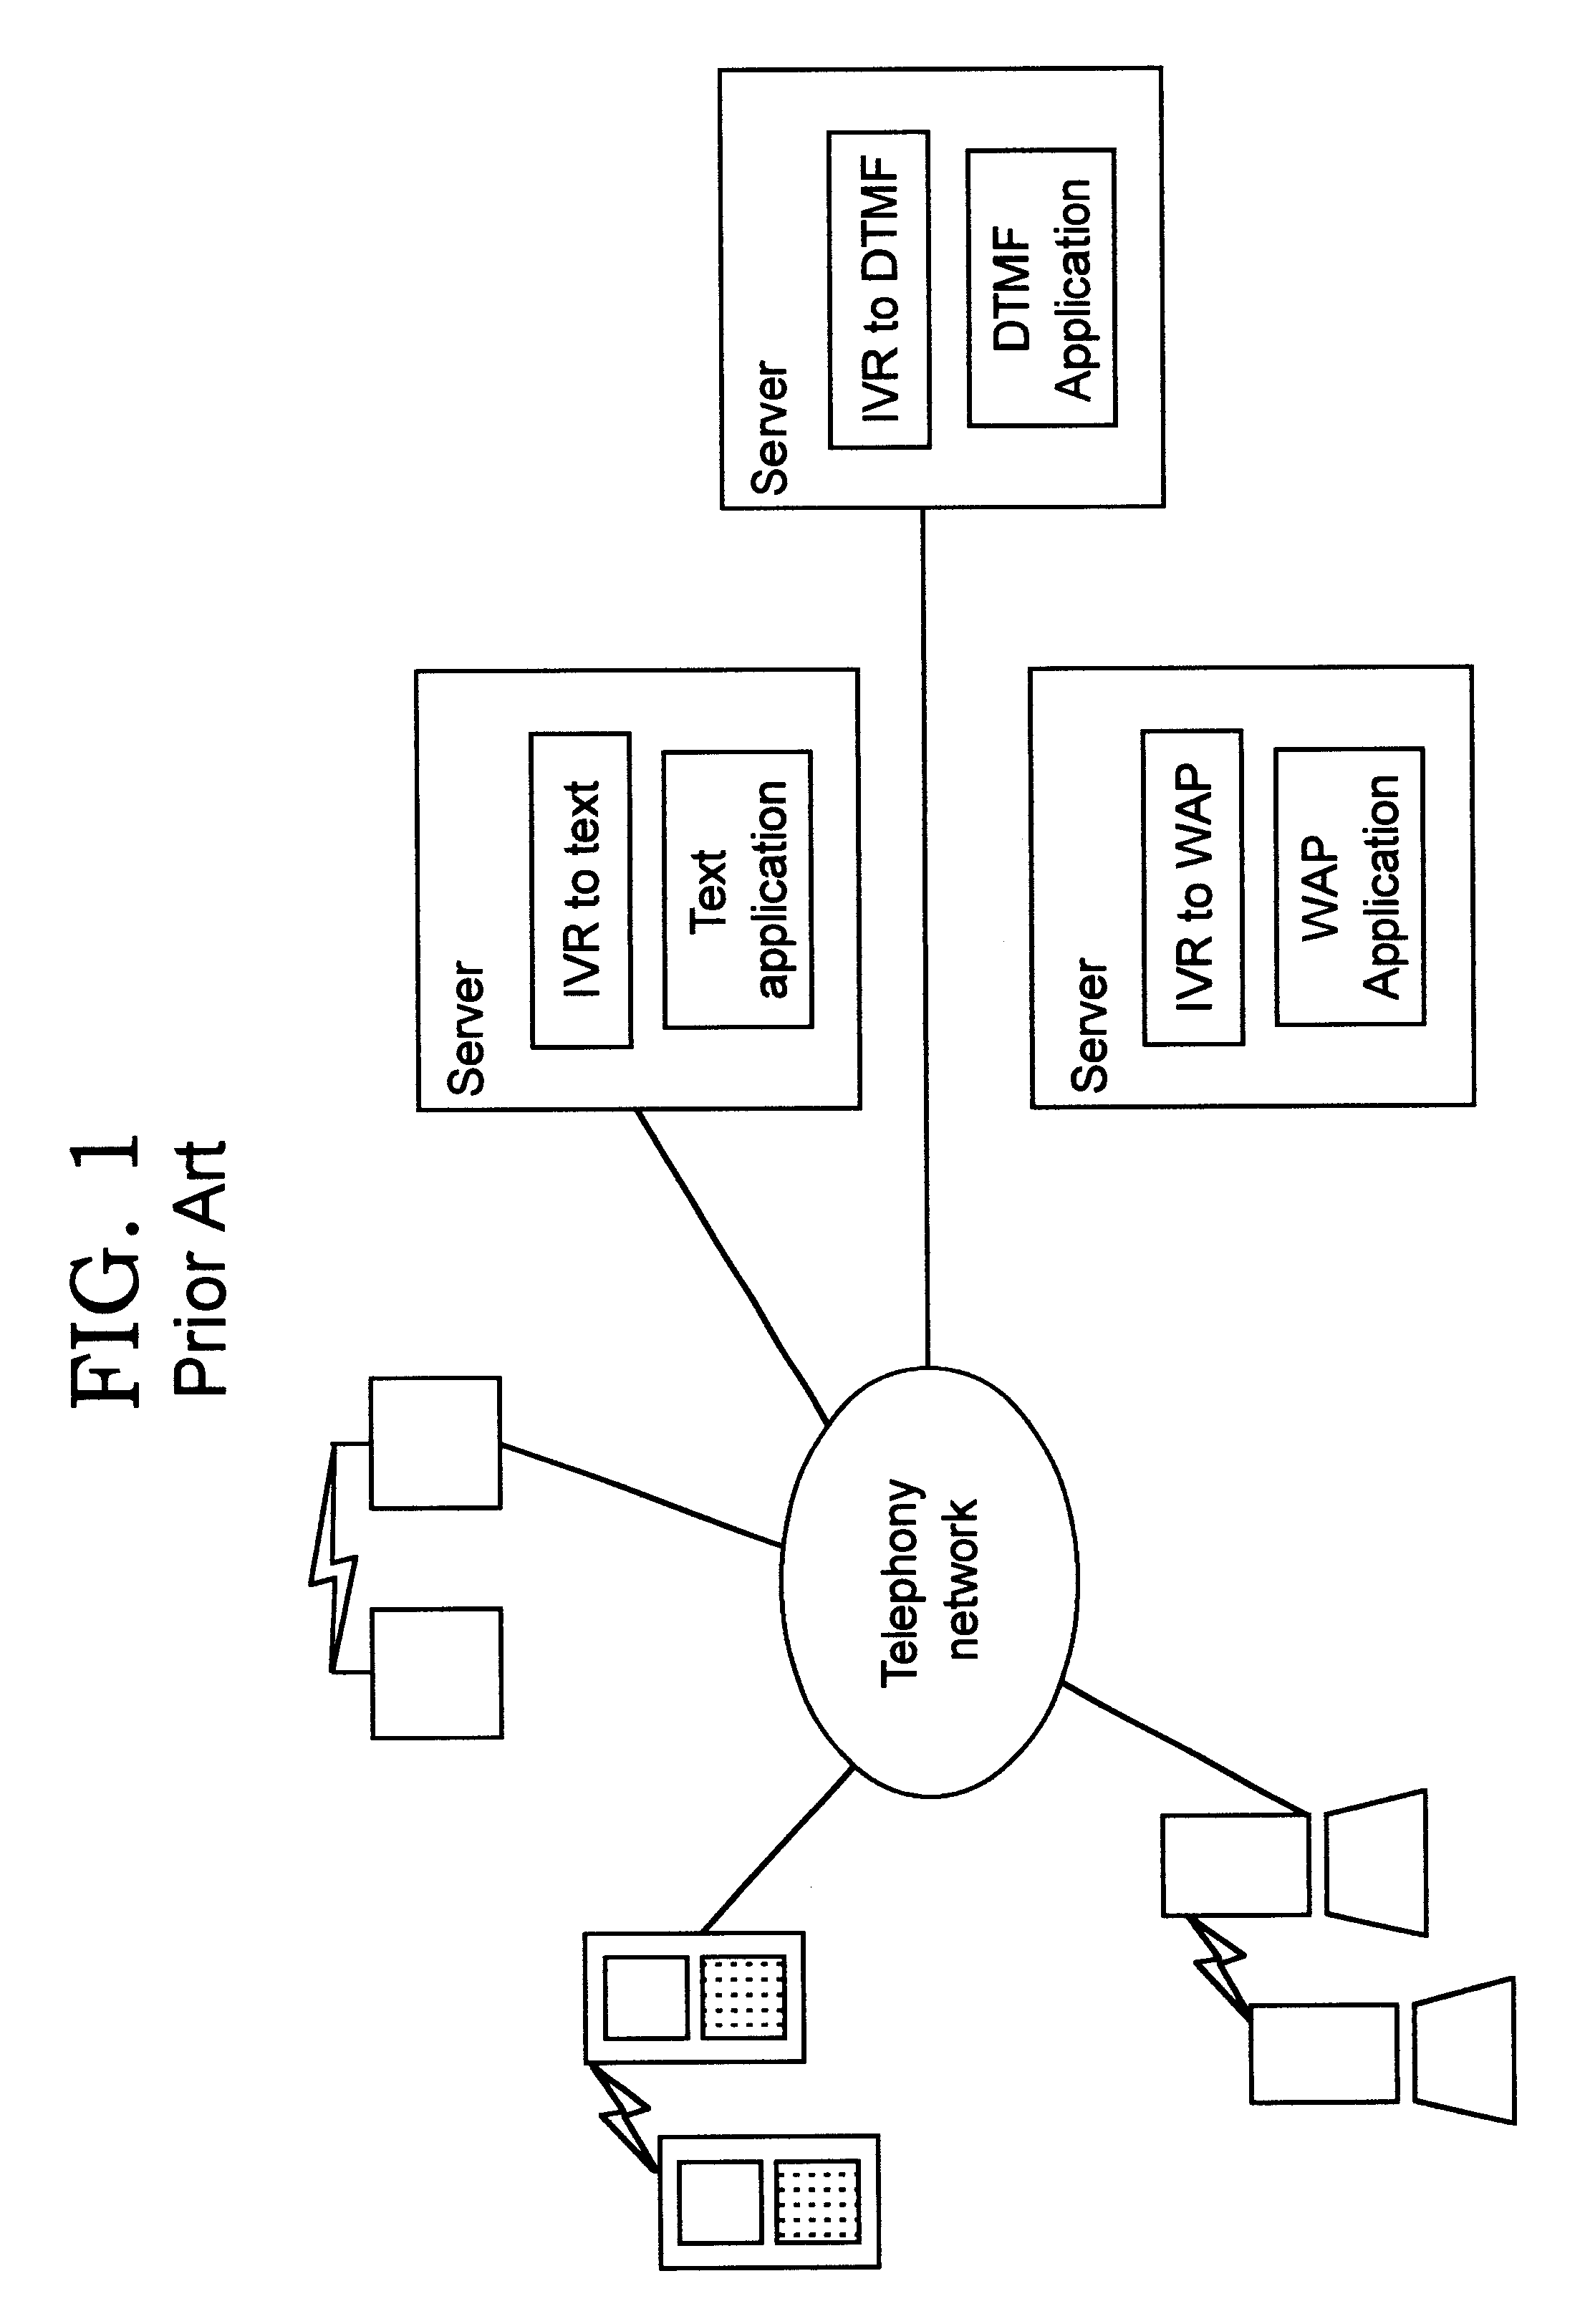 Speech encoding in a client server system